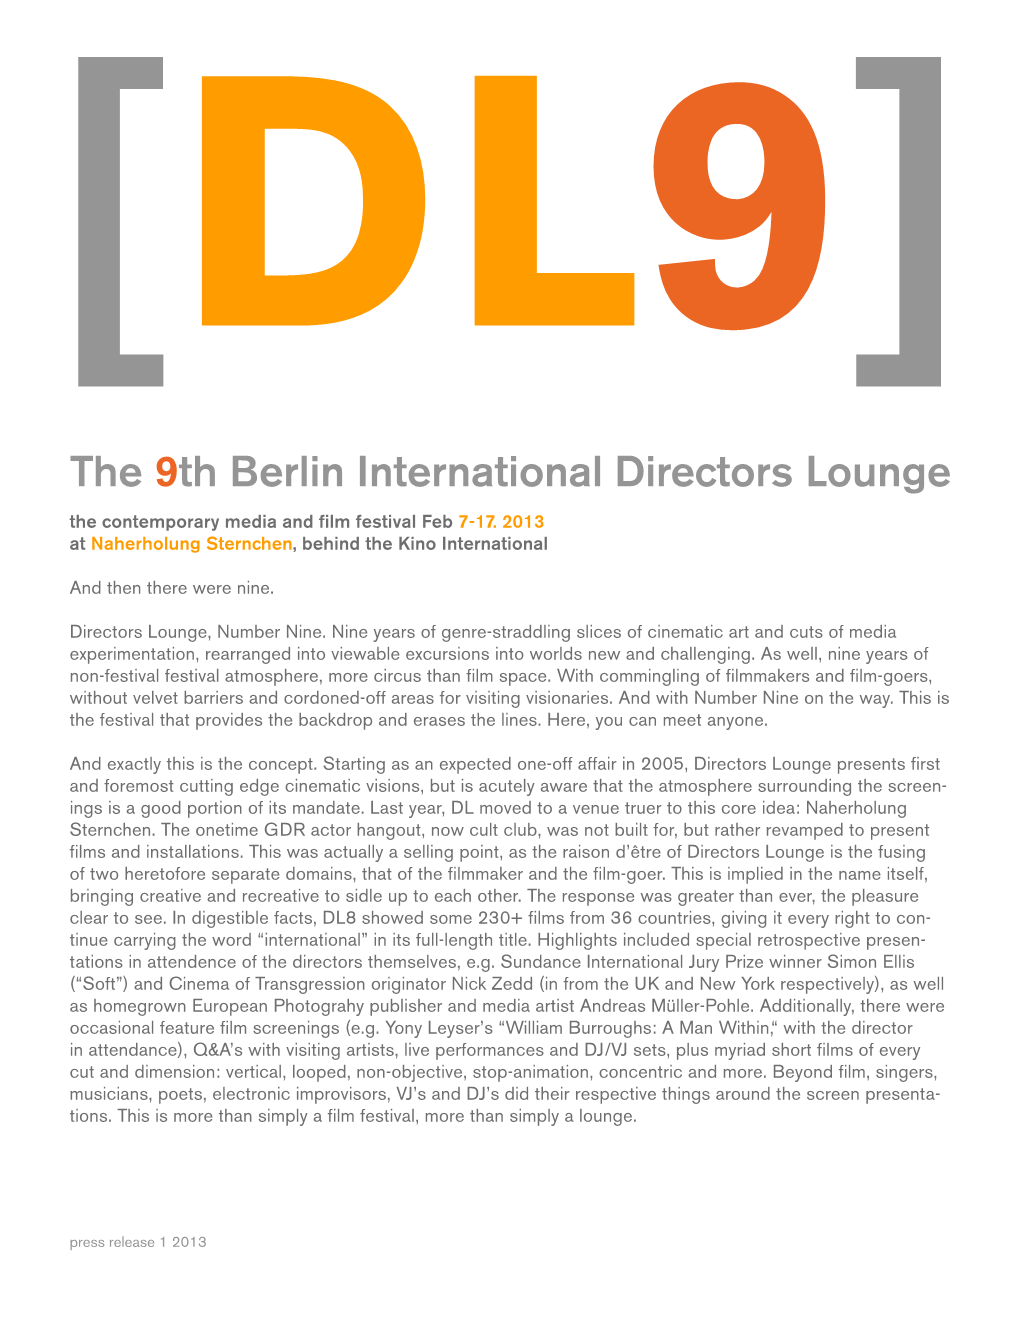 The 9Th Berlin International Directors Lounge the Contemporary Media and Film Festival Feb 7-17